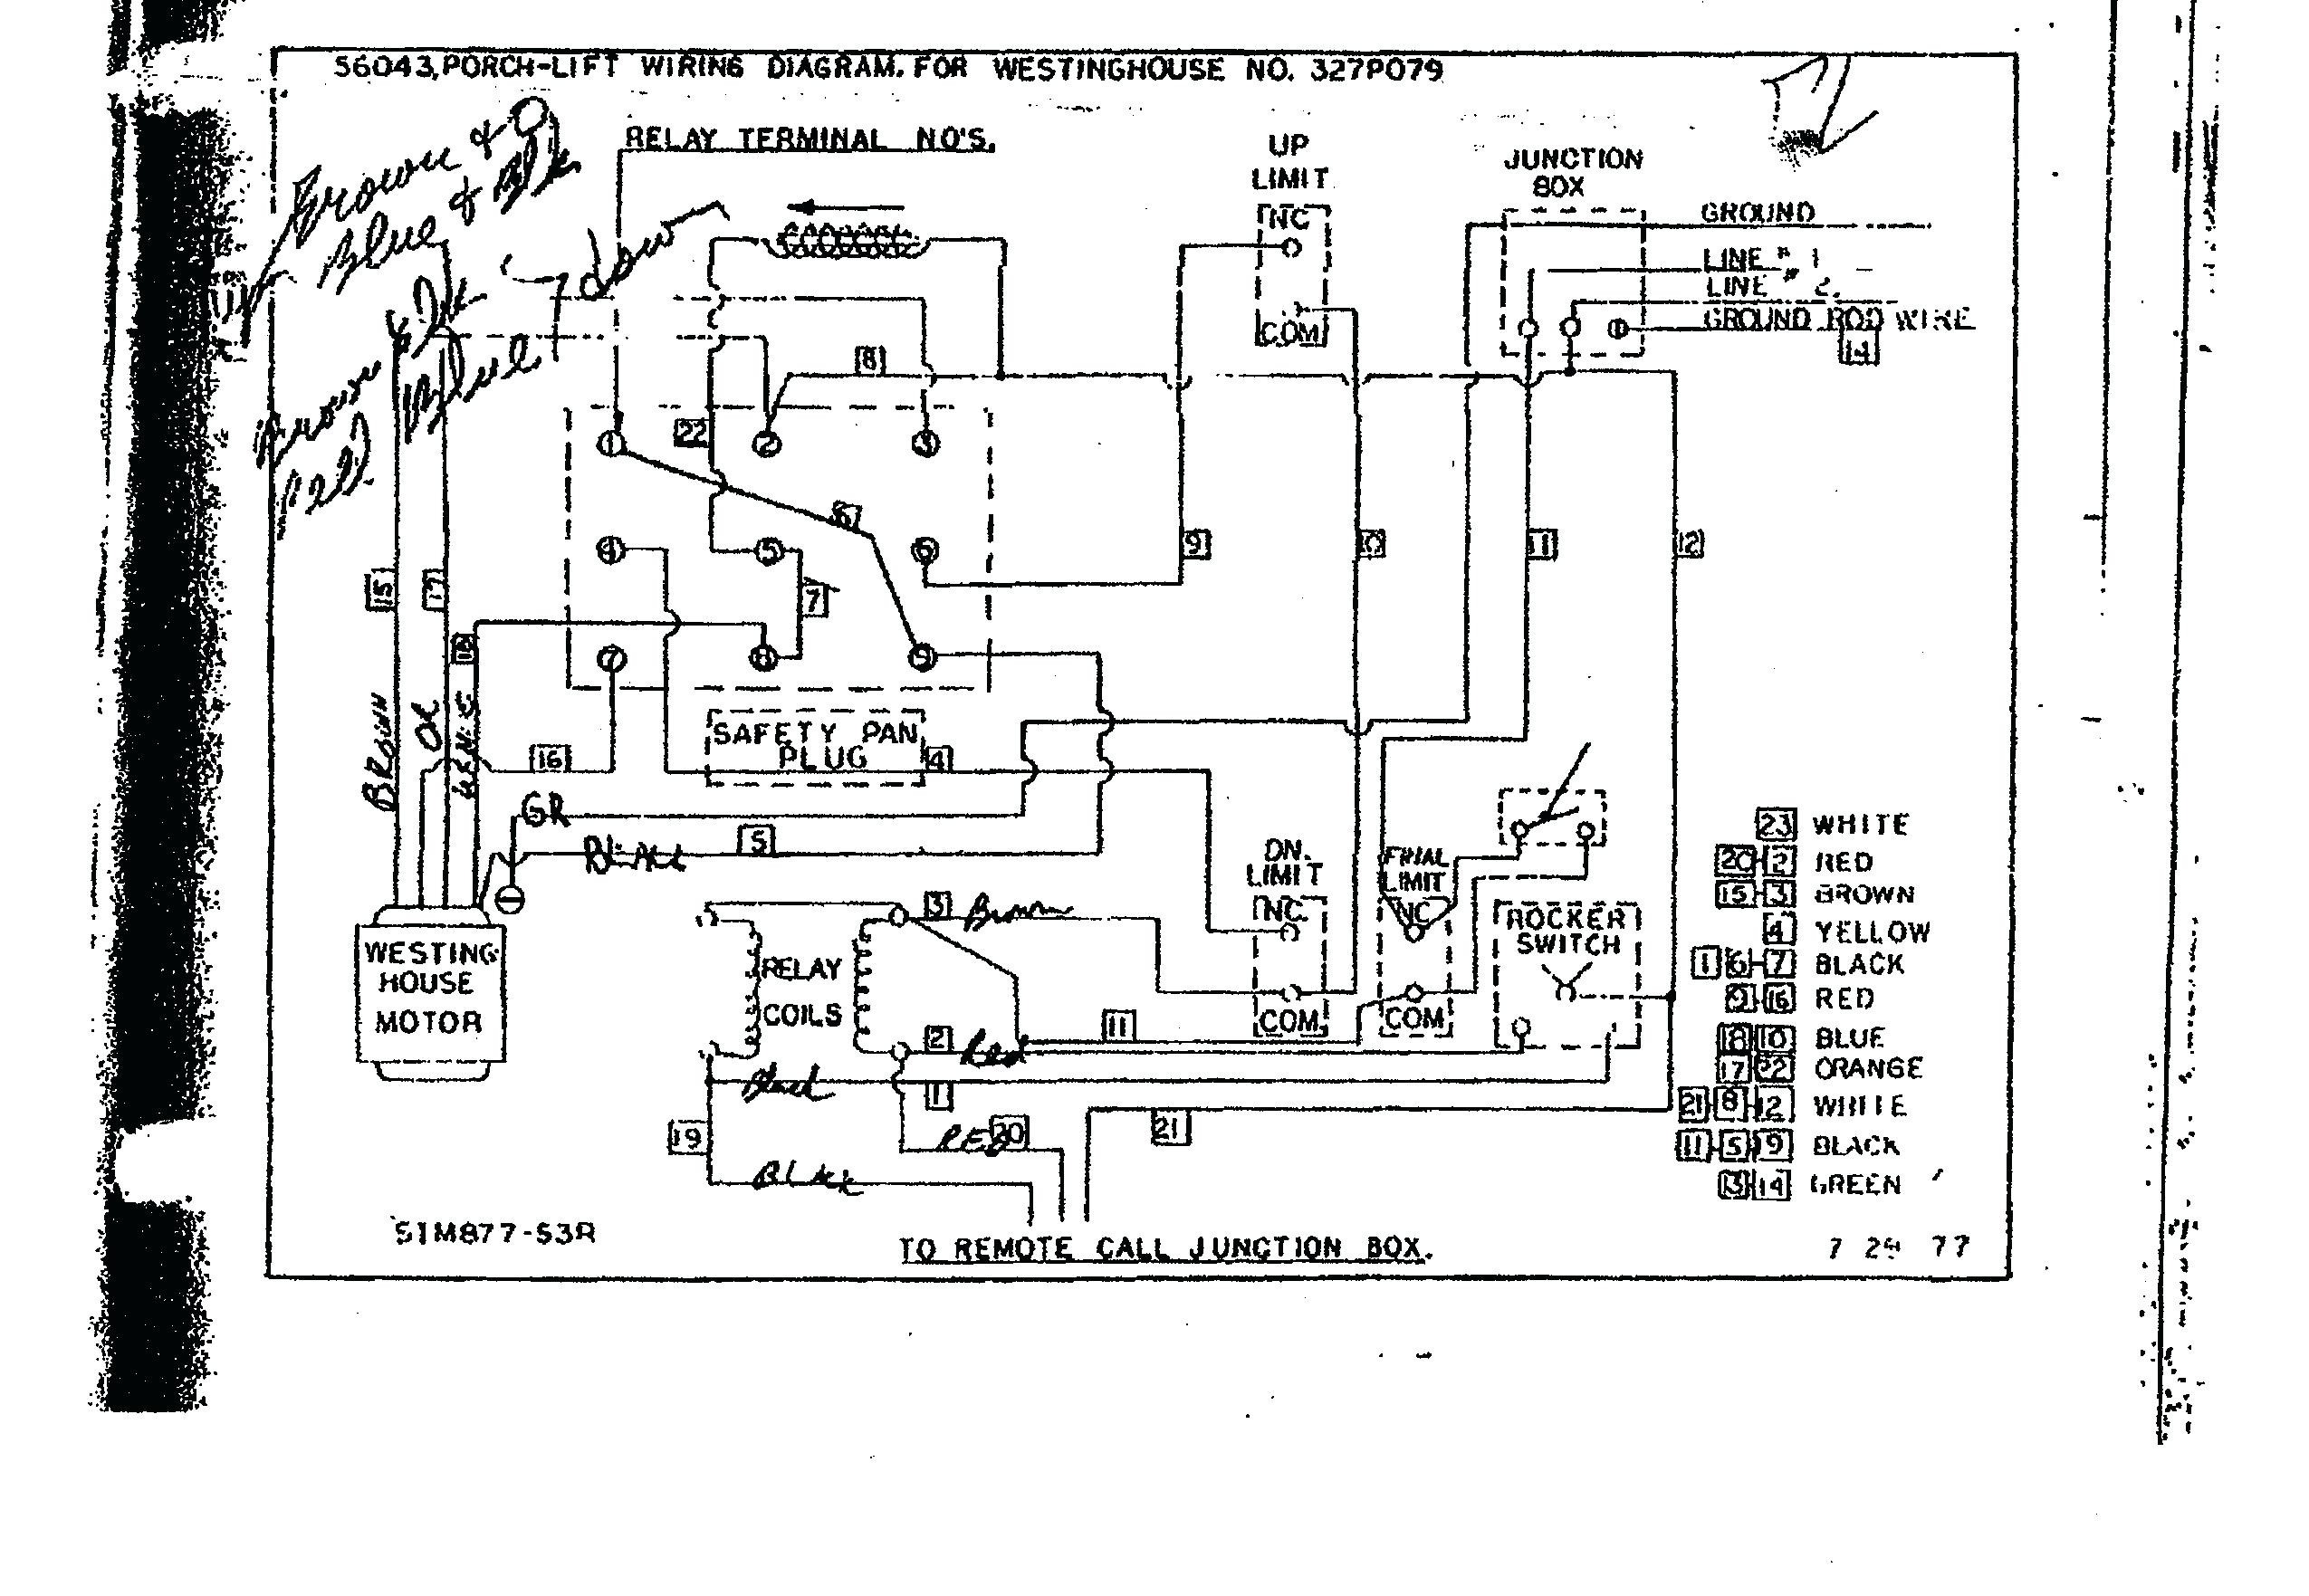 240 Volt Wiring Diagram Fresh Reversible Single Phase Ac Motor Wiring Diagram for Dimmer Switch